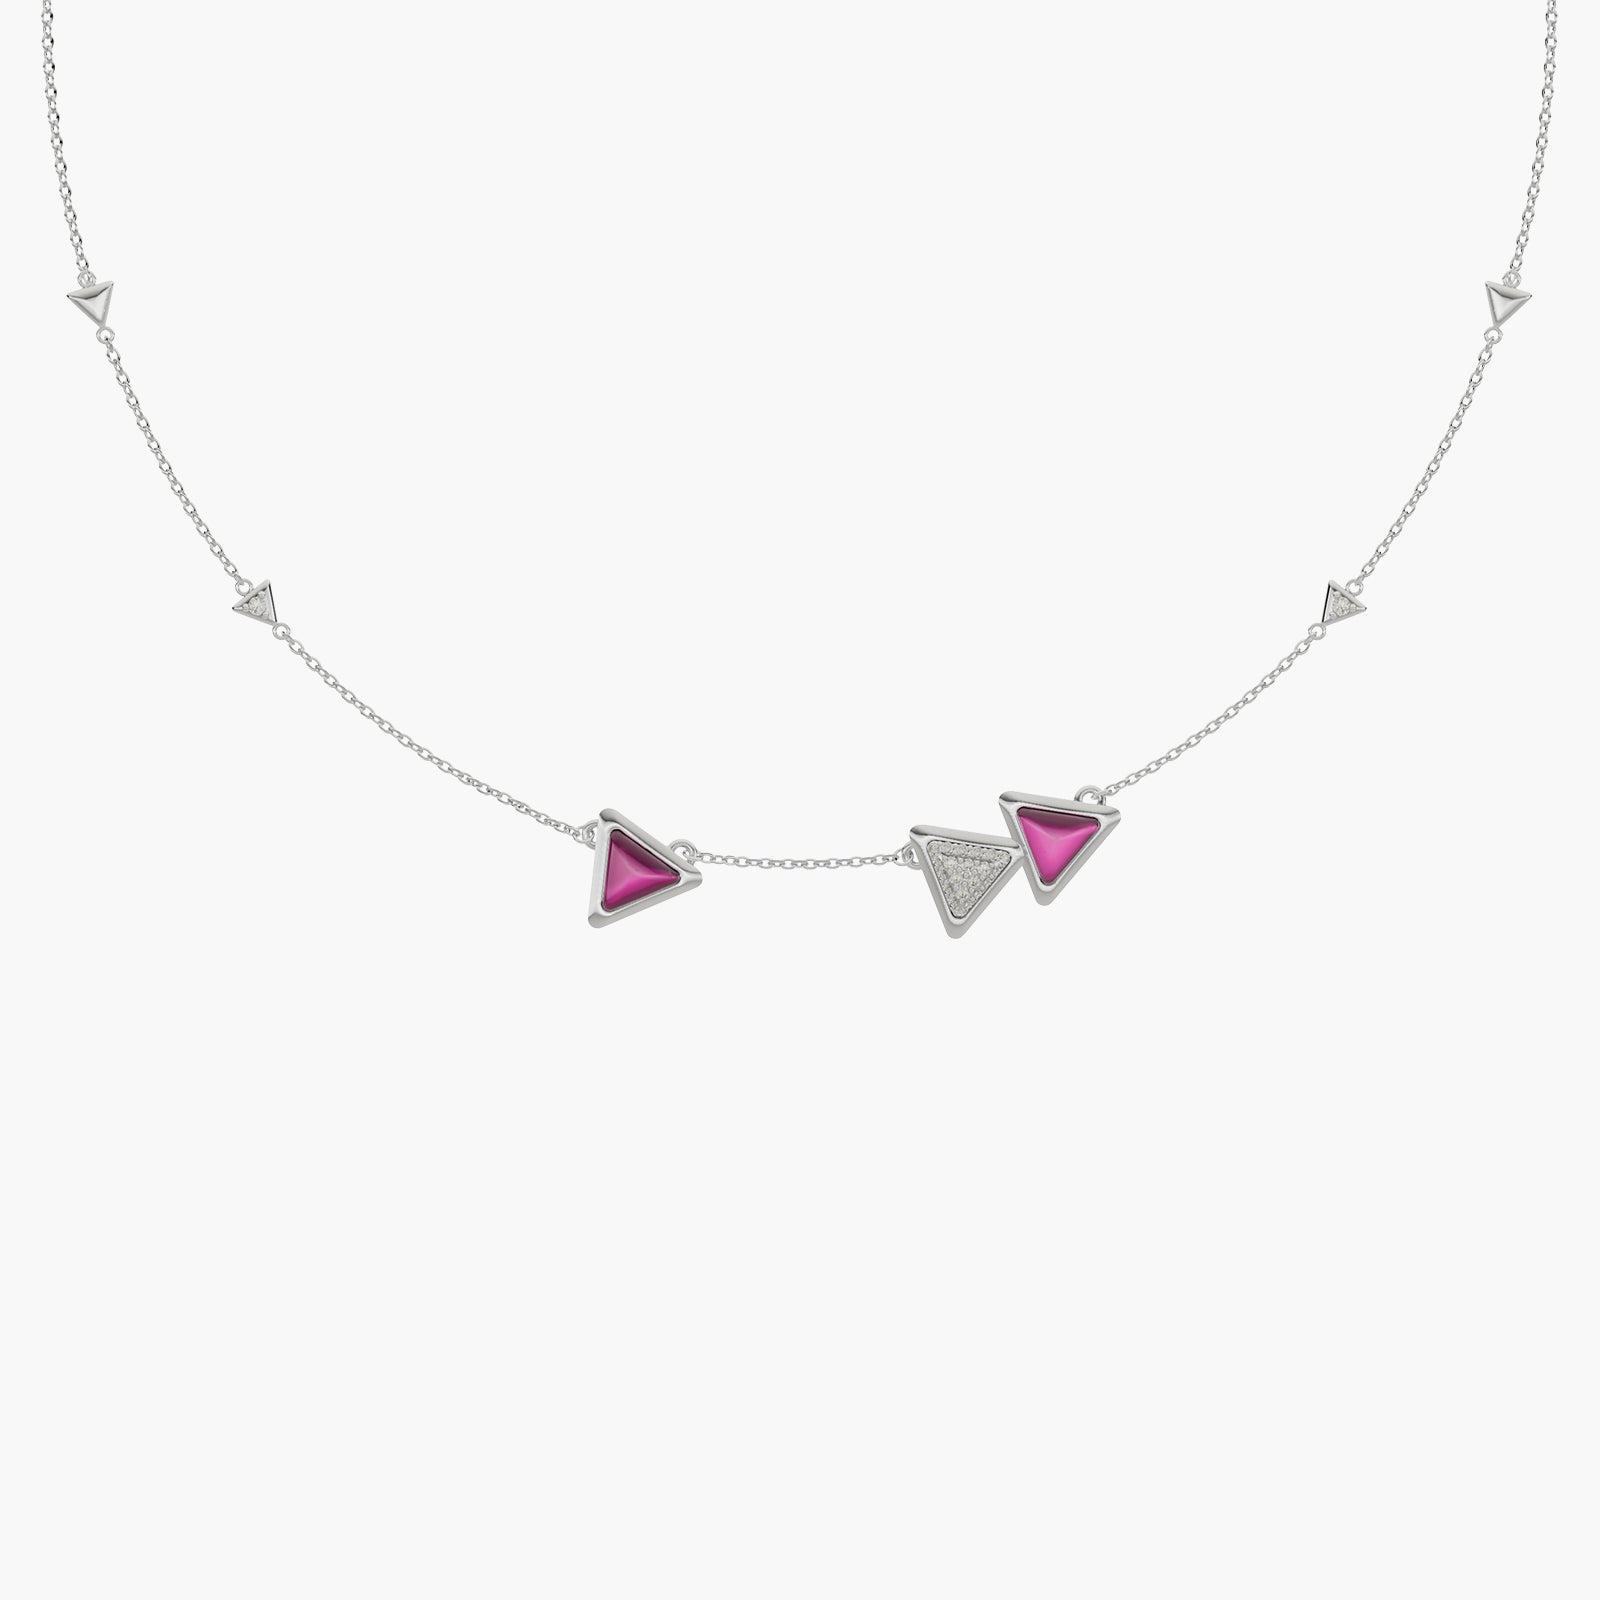 Necklace Dove Vai Forward Exquisite White Gold Pink Garnet and Diamonds